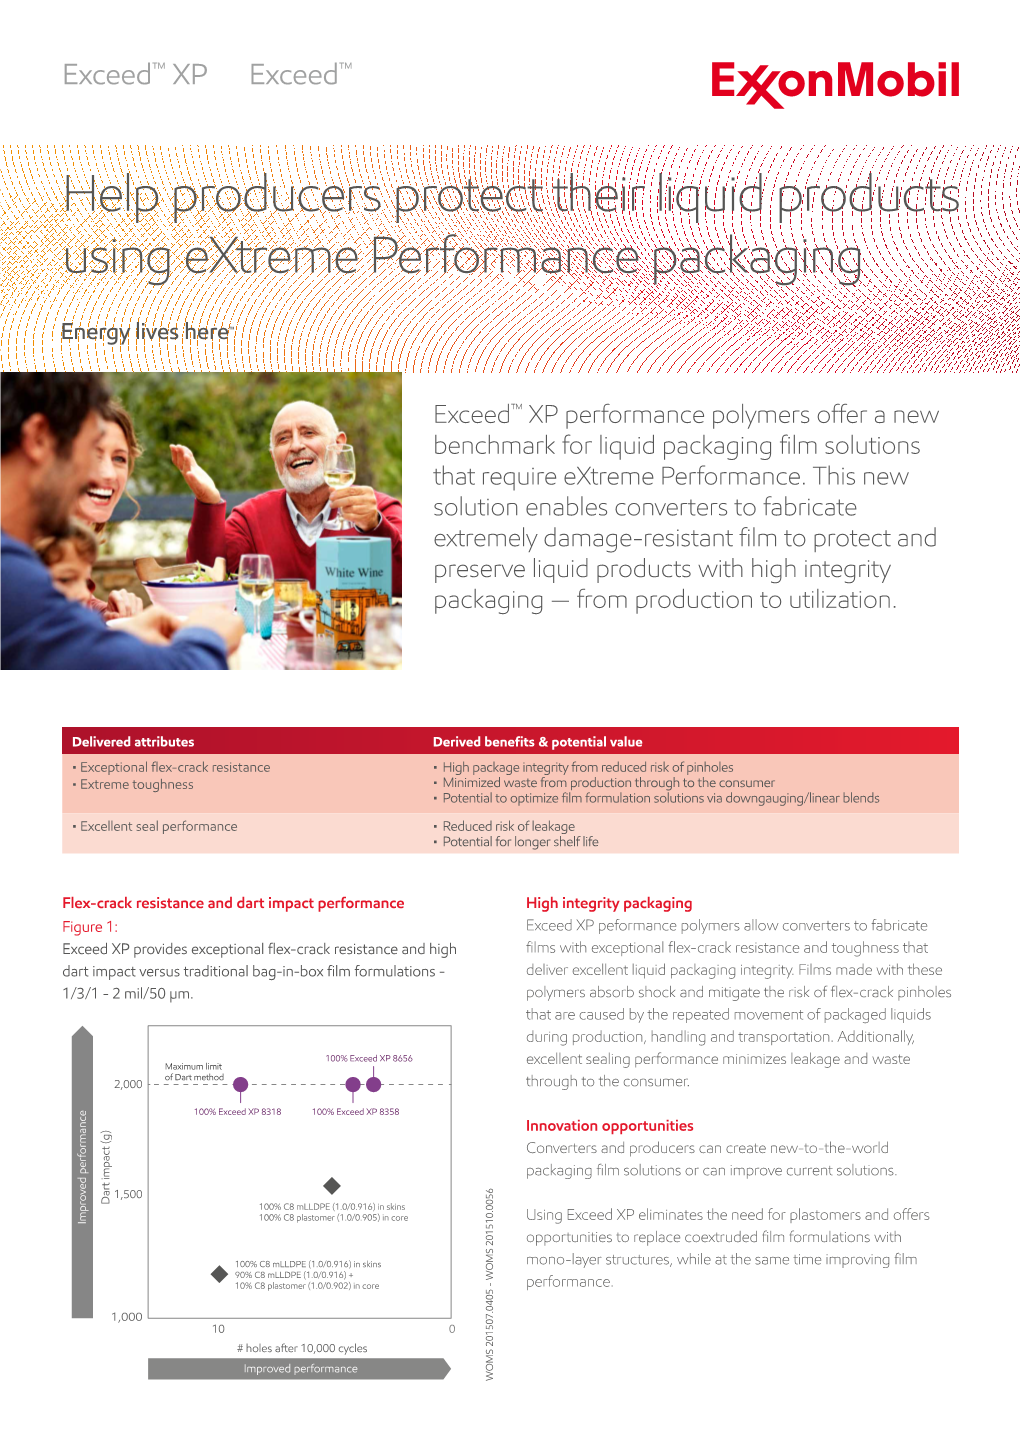 Help Producers Protect Their Liquid Products Using Extreme Performance Packaging